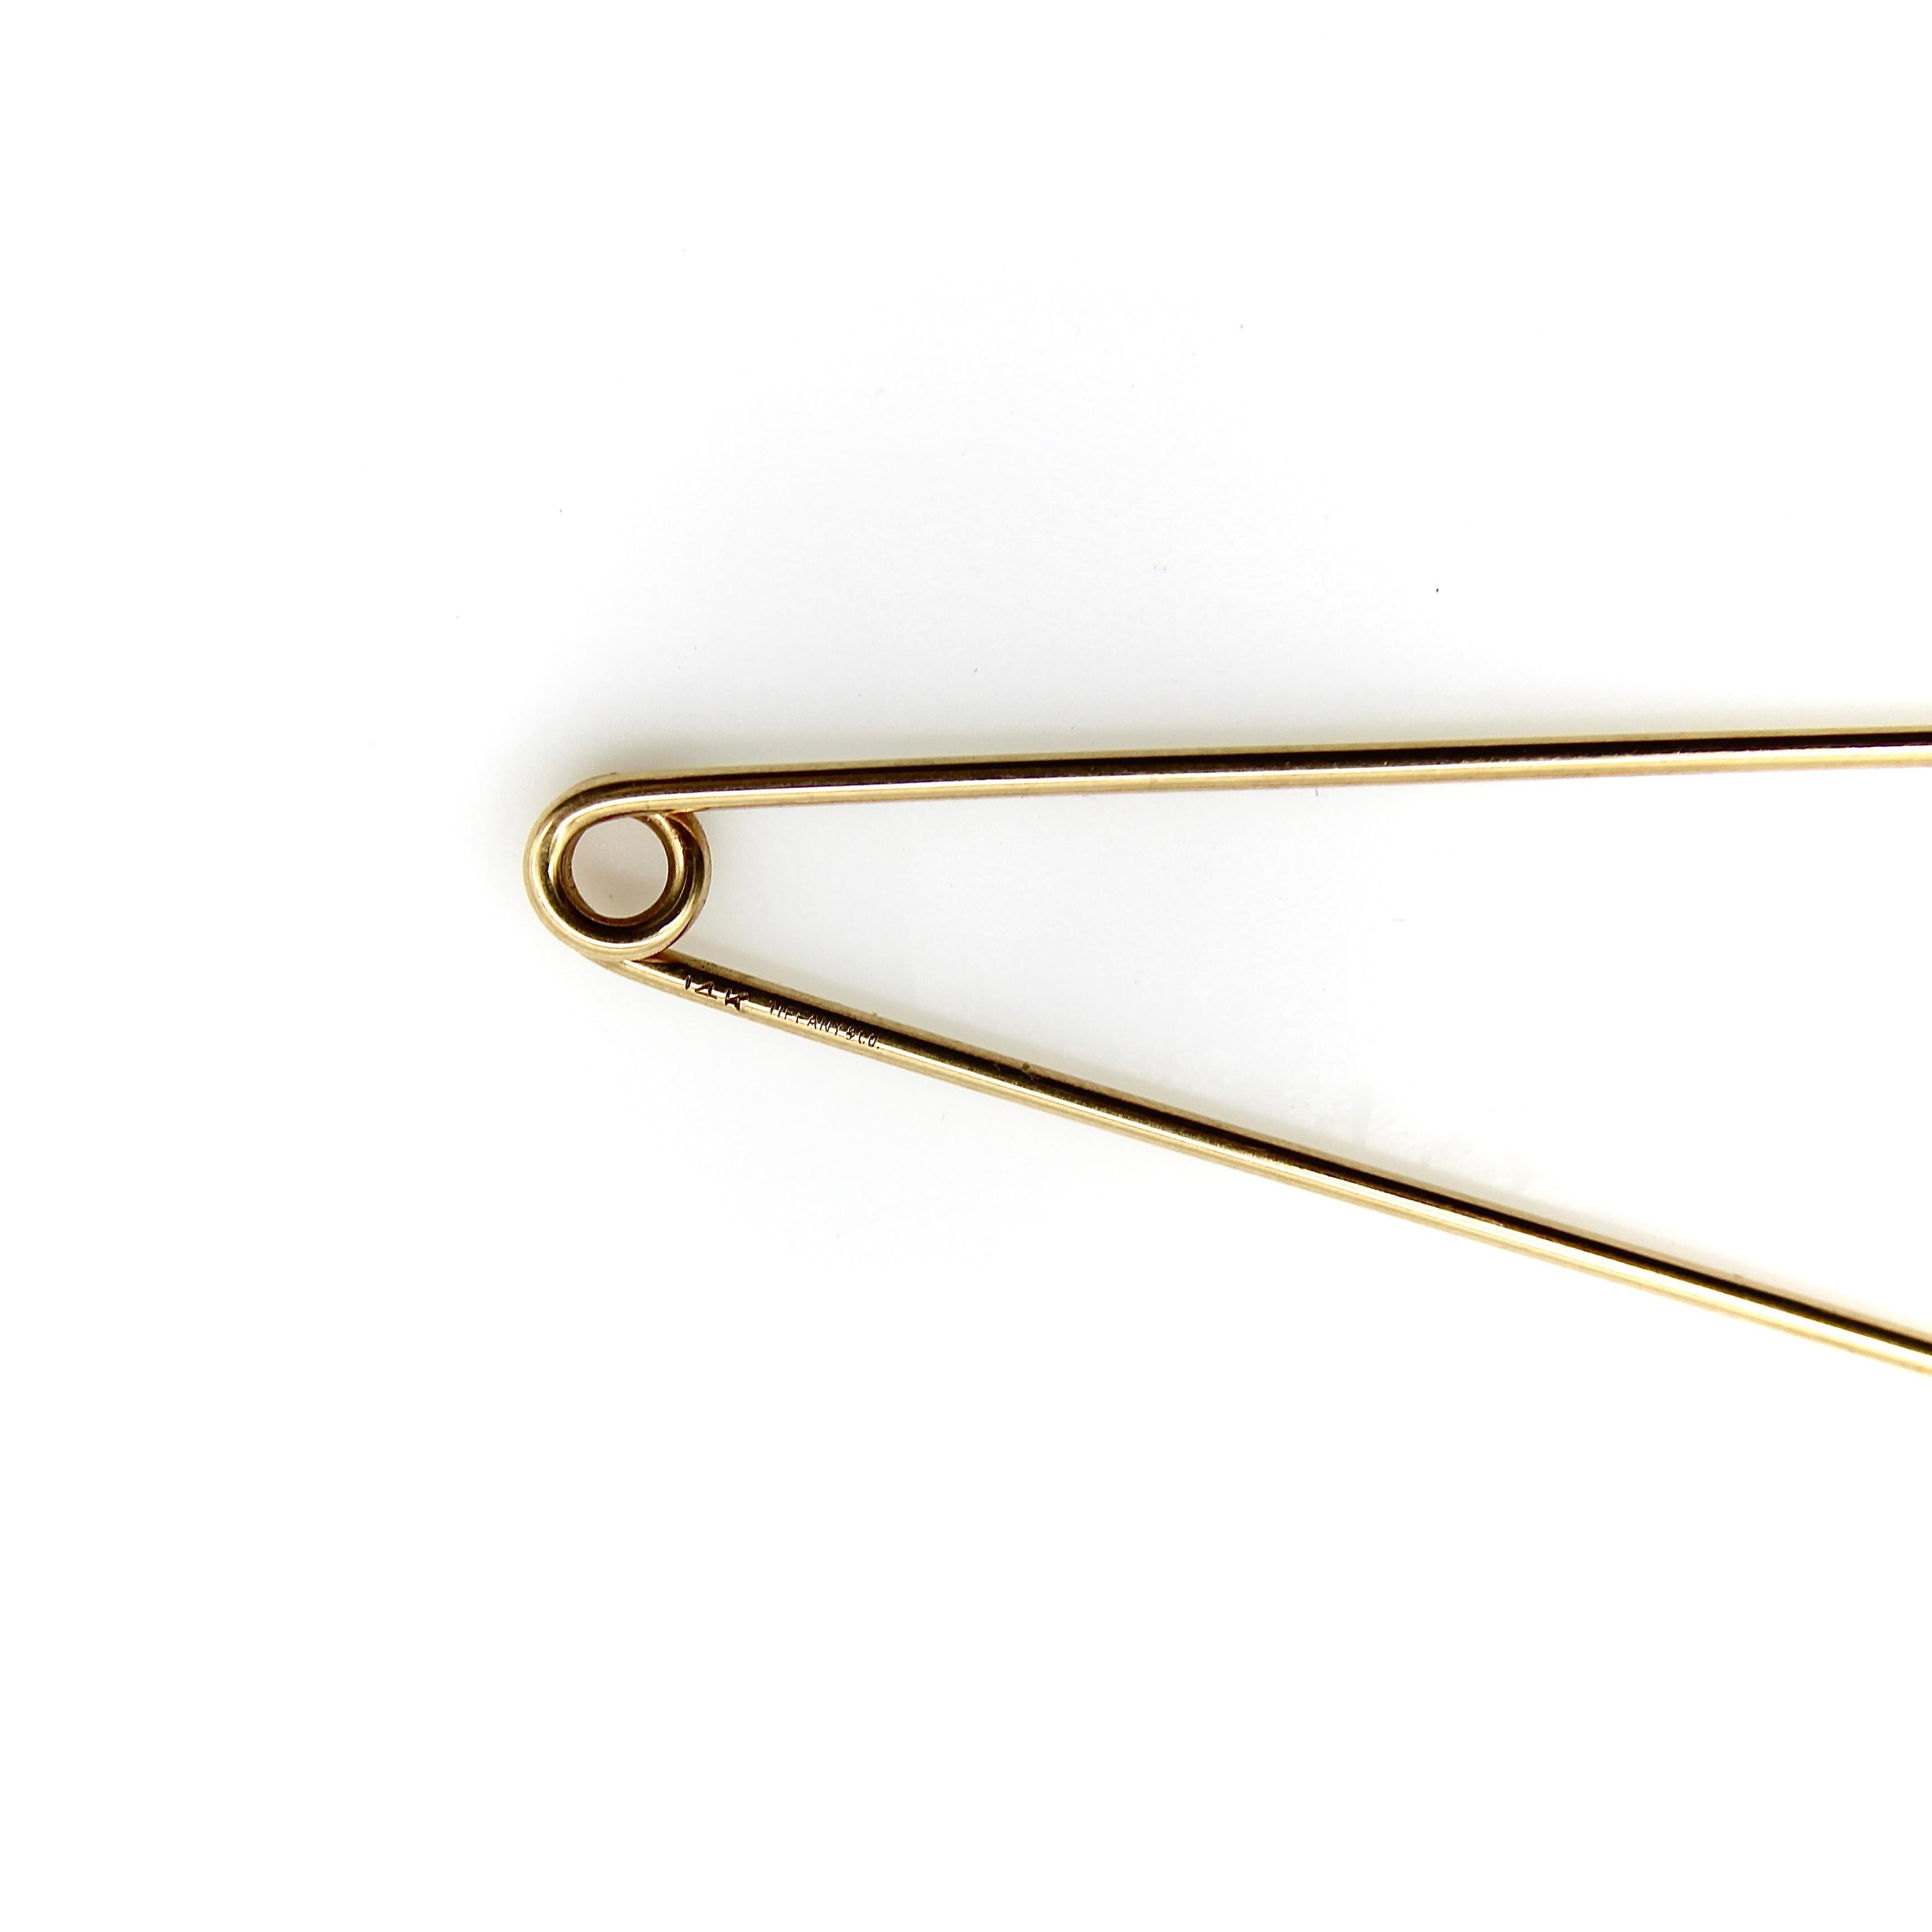 Tiffany & Co. has a history of safety pin jewelry that dates back to the 1940’s. Throughout the years, there have been many versions of the iconic safety pin, varying in shape, size, and decoration. This particular pin, circa the 1940’s, has the